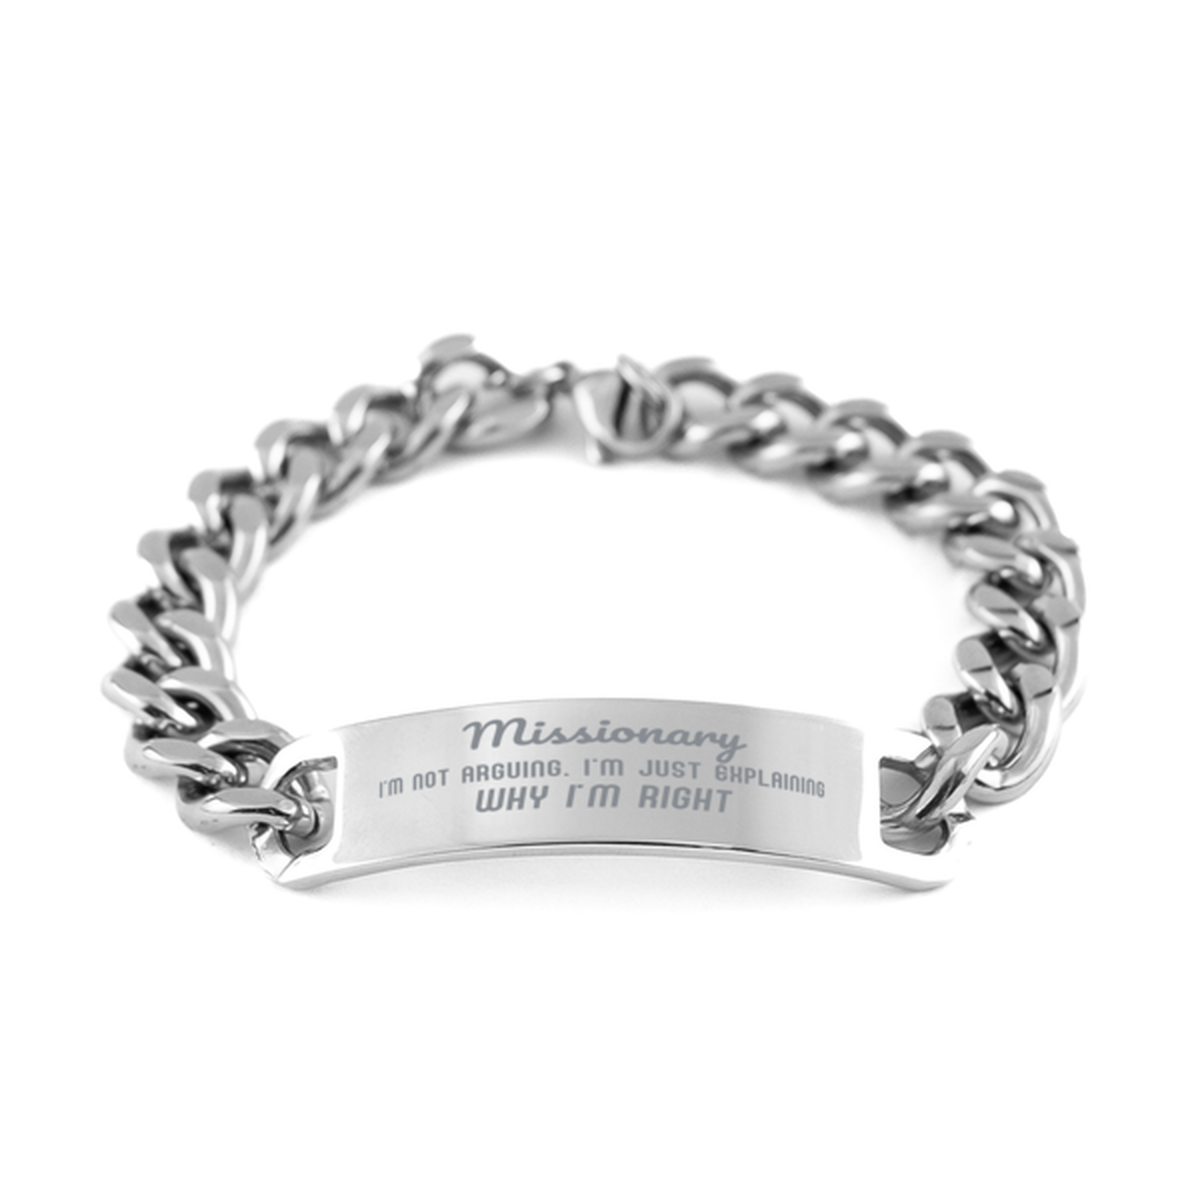 Missionary I'm not Arguing. I'm Just Explaining Why I'm RIGHT Cuban Chain Stainless Steel Bracelet, Graduation Birthday Christmas Missionary Gifts For Missionary Funny Saying Quote Present for Men Women Coworker